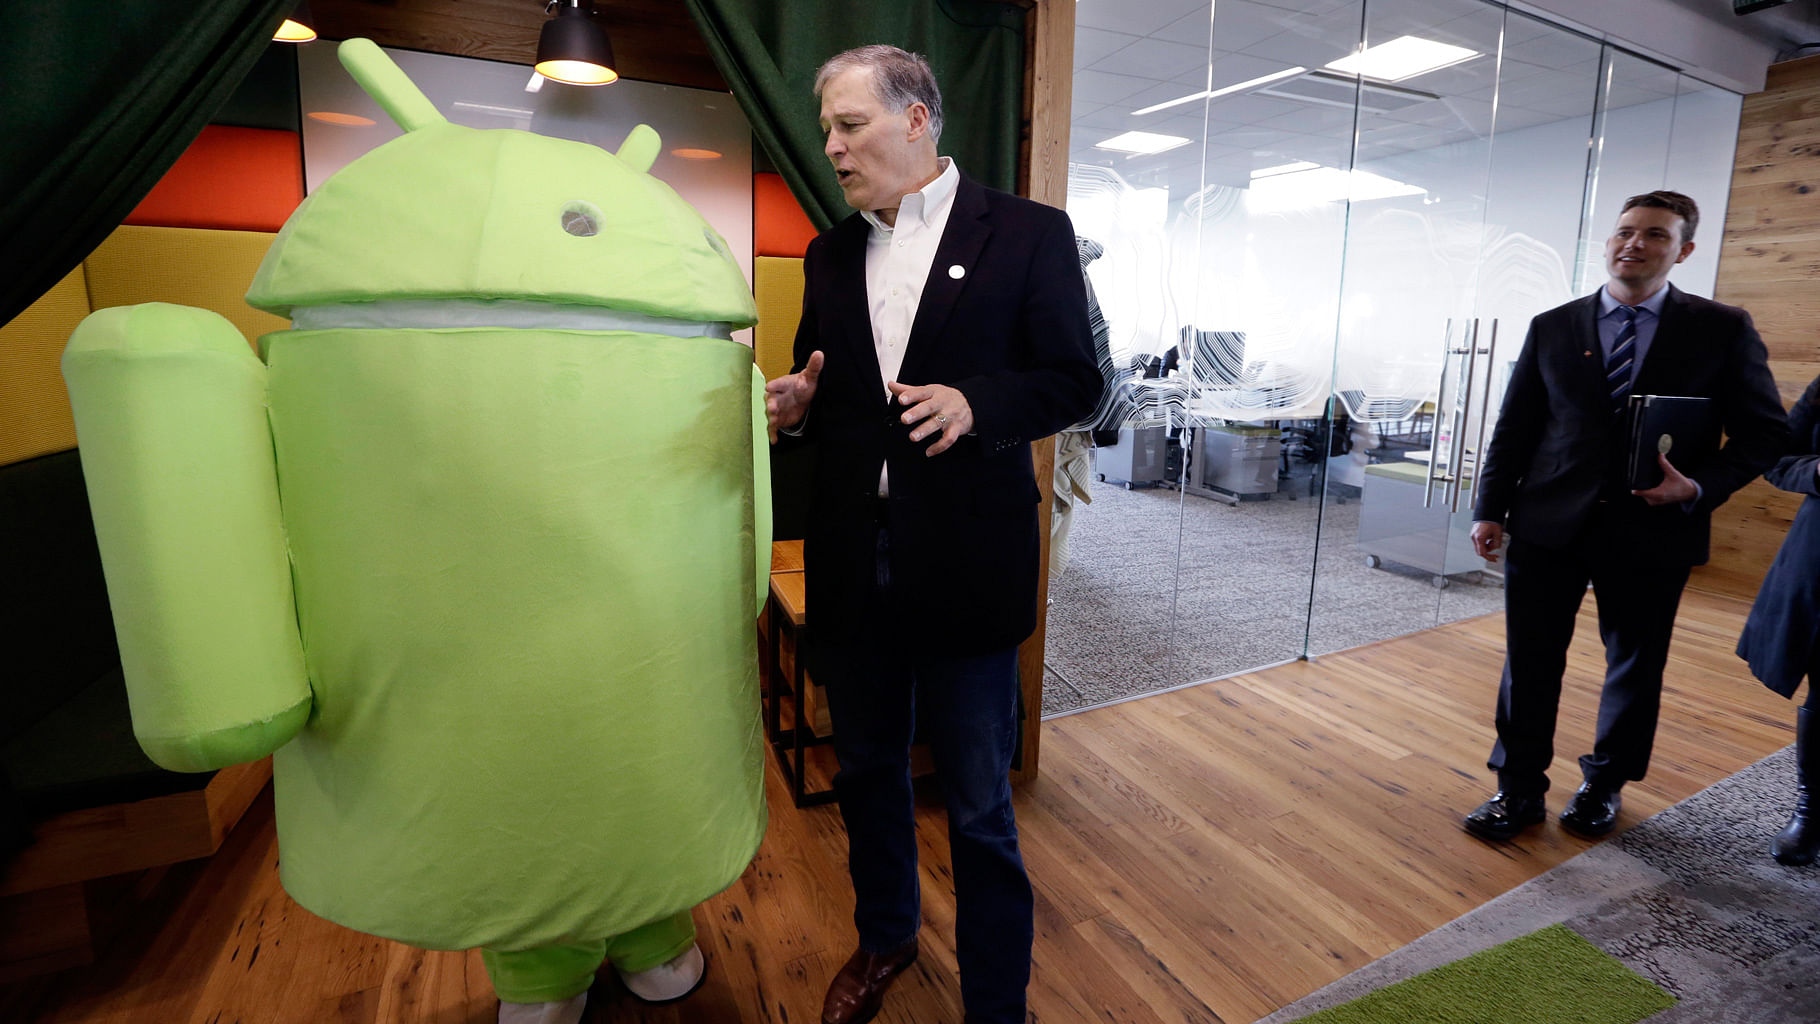 Gov. Jay Inslee chats with “Andy the Android,” Google’s mascot, at the opening of the expansion of Google’s campus Tuesday, 16 Feb 2016 (Photo: AP)